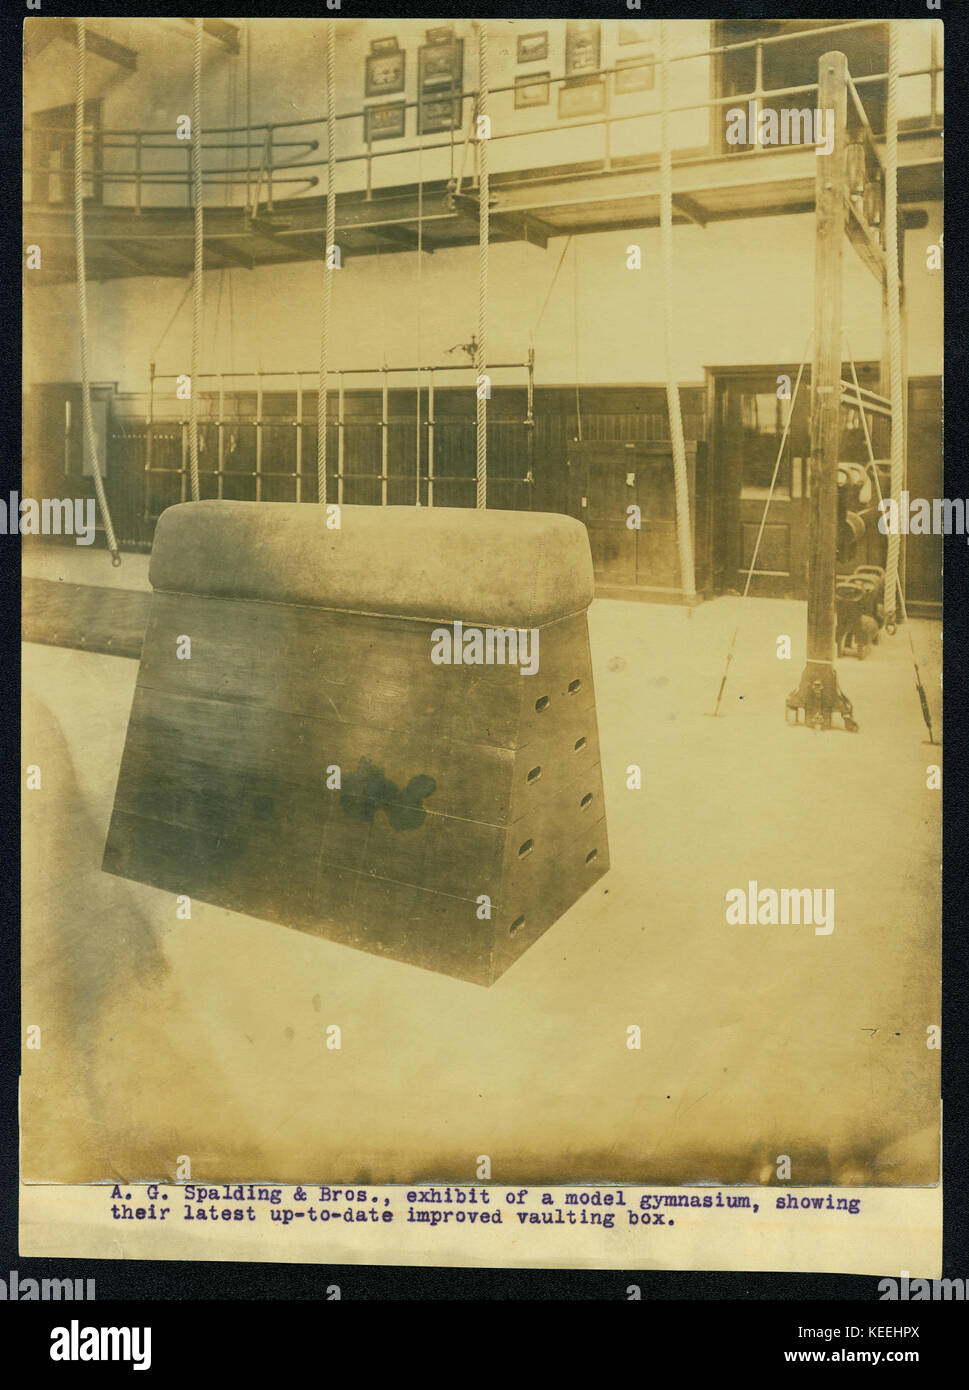 A. G. Spalding and Brothers, exhibit of a model gymnasium, showing their latest up to date improved vaulting box. Stock Photo